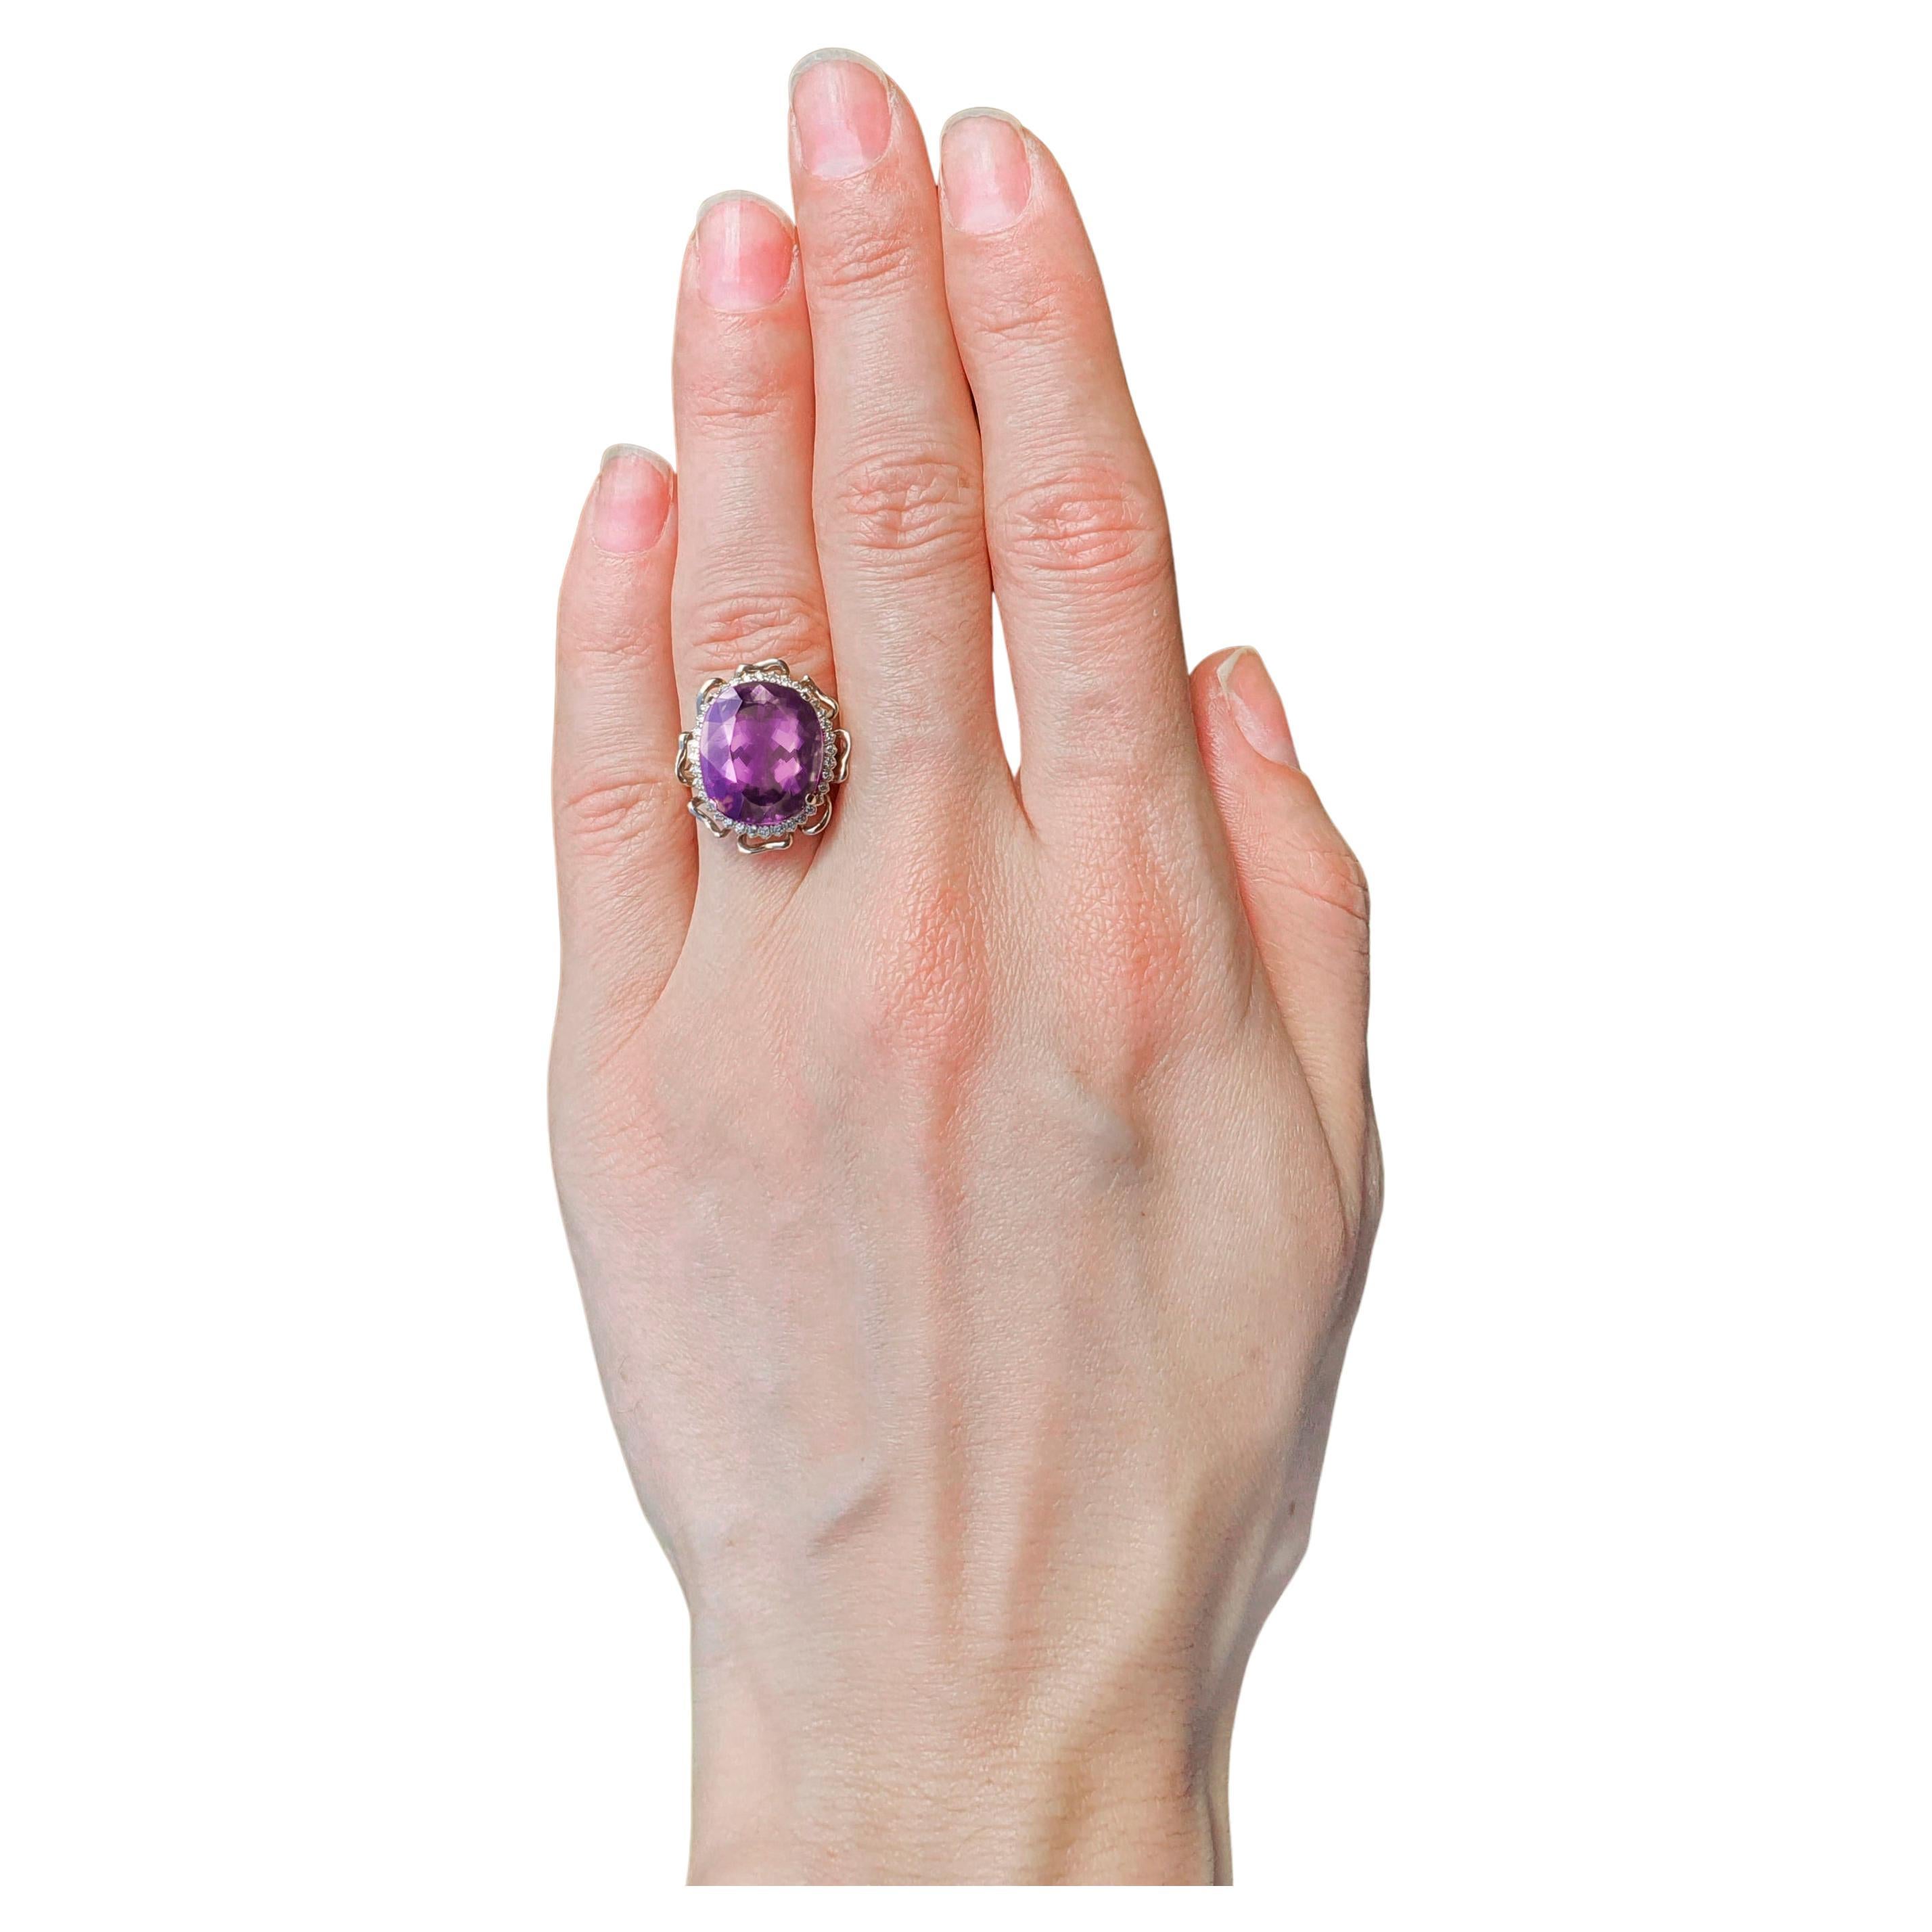 For Sale:  14 Karat Gold Flower Ring with Amethyst and Diamonds